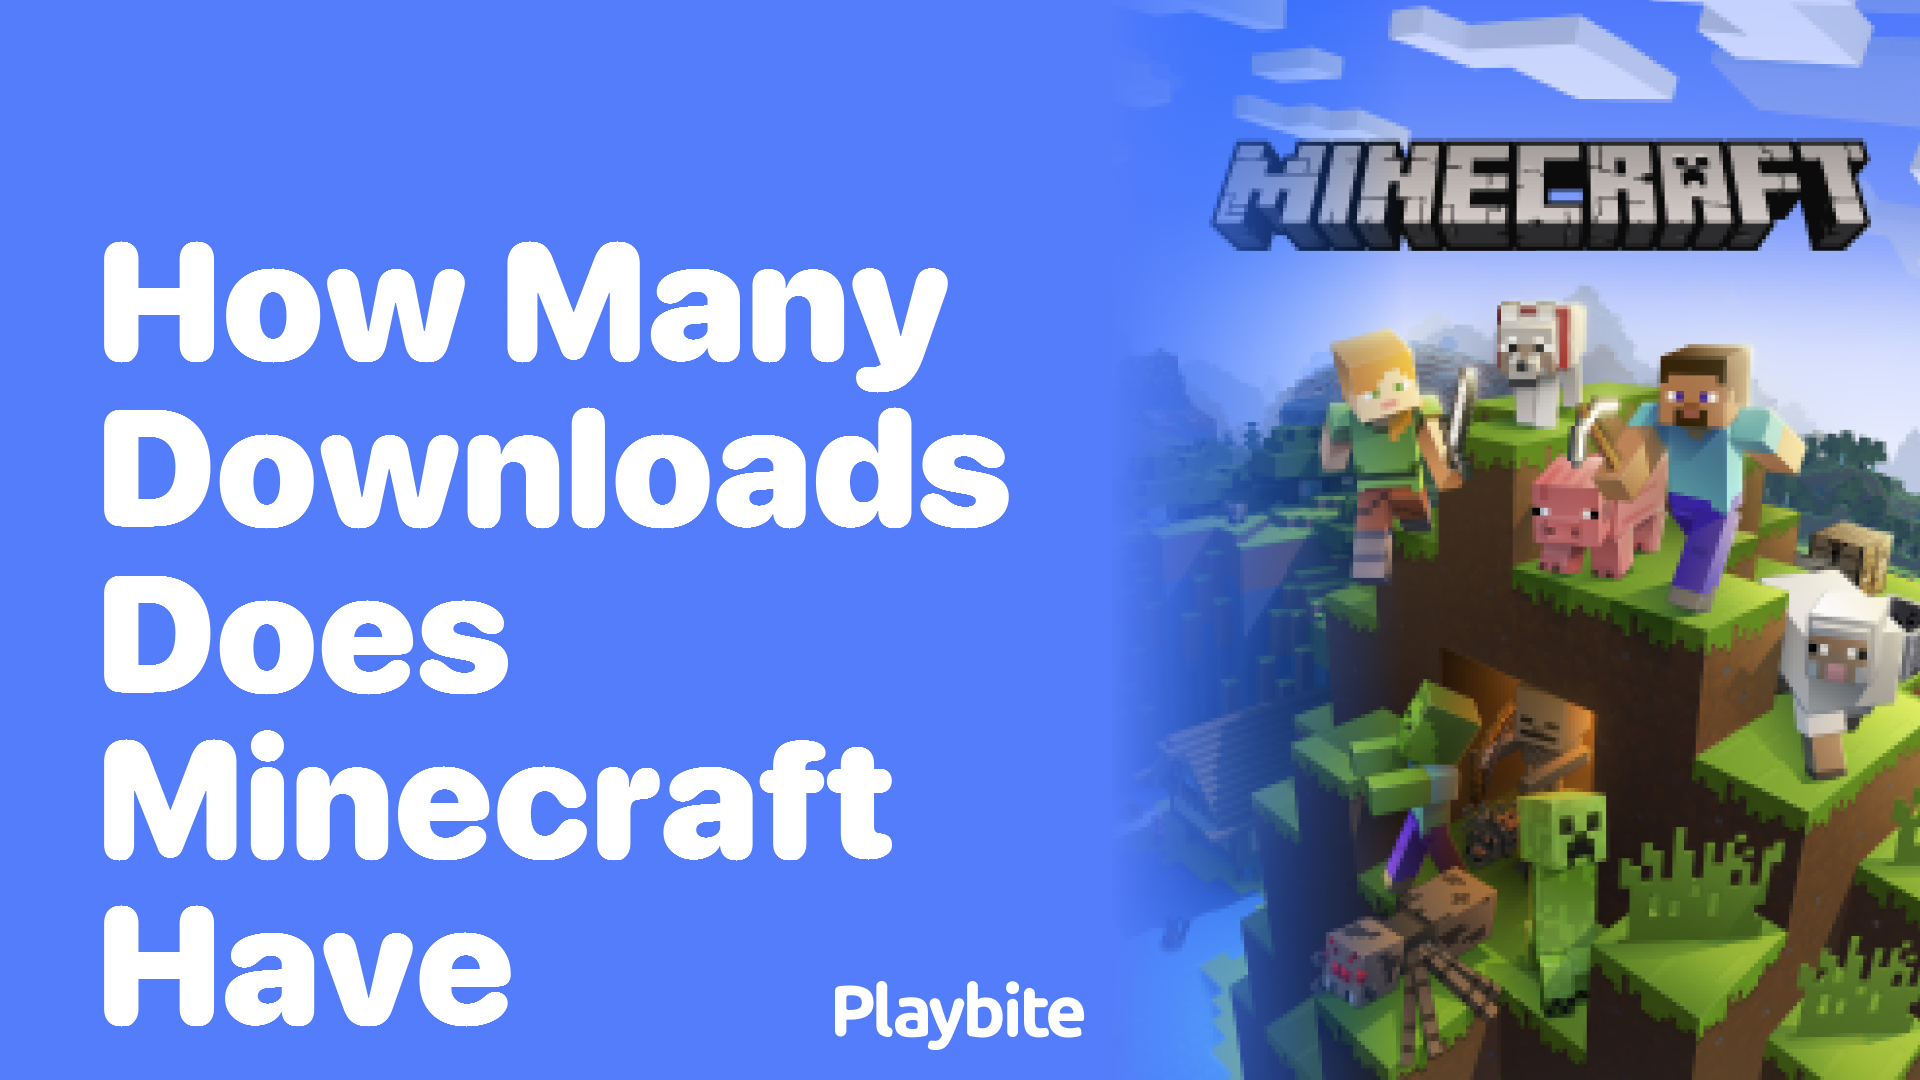 How Many Downloads Does Minecraft Have?